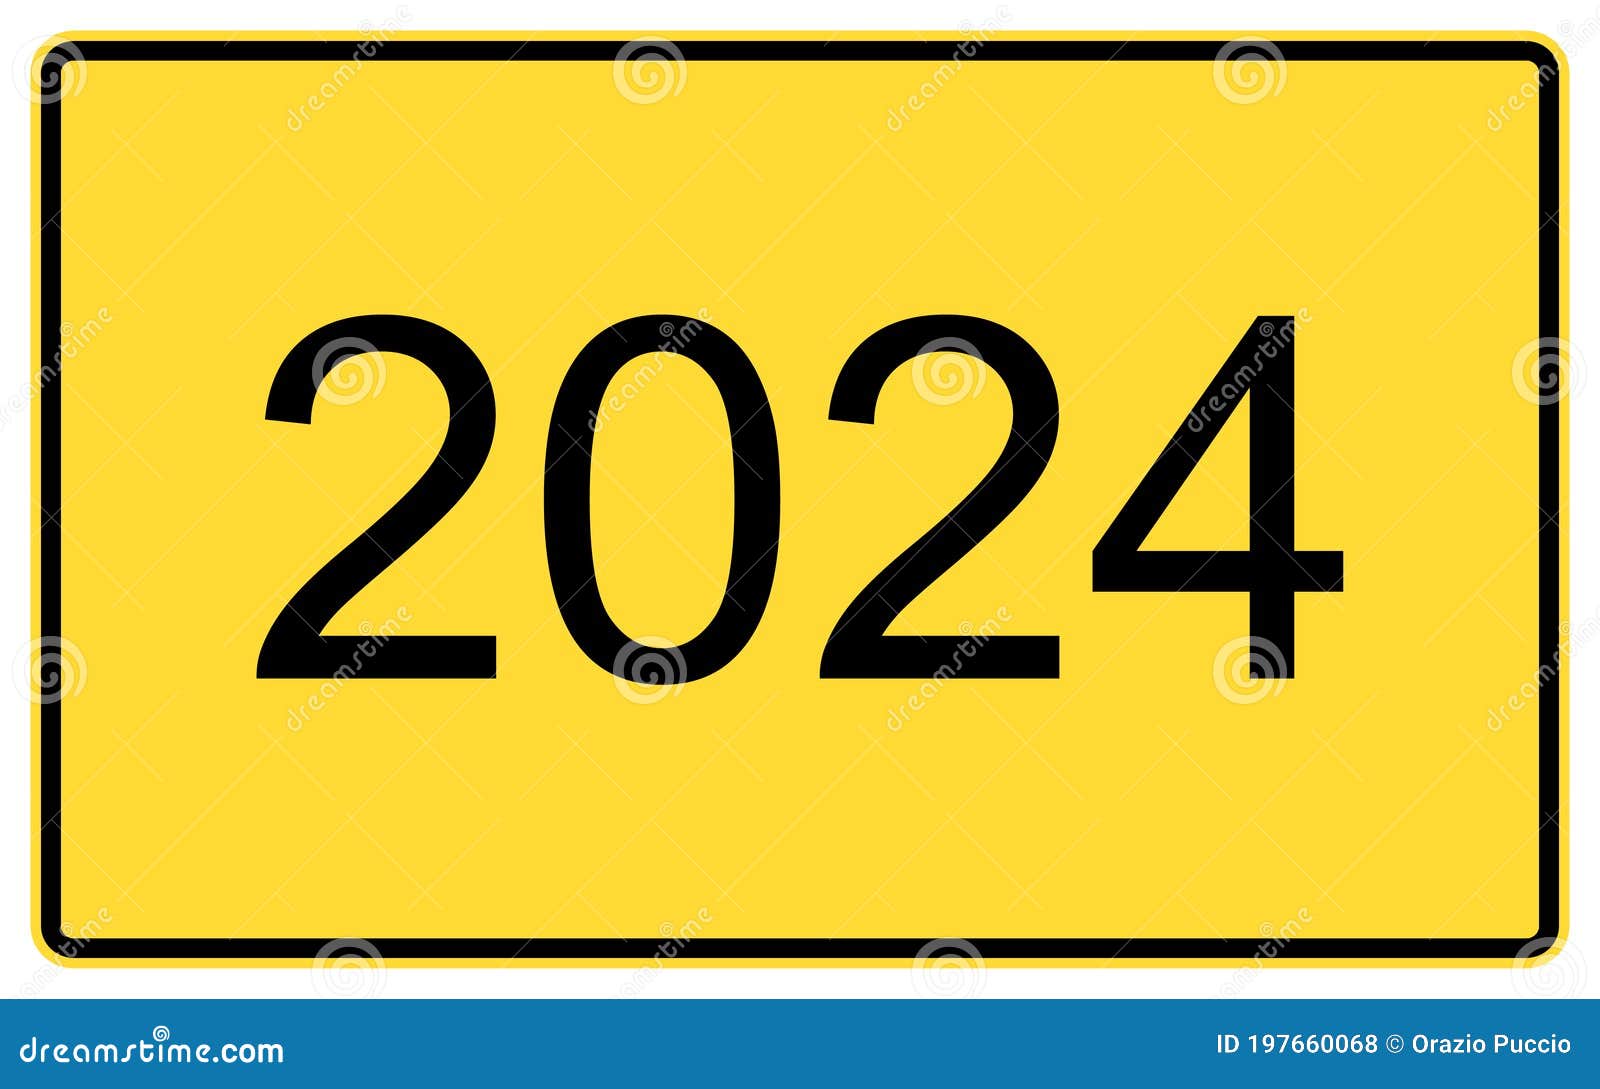 2024 New Year. 2024 New Year on a Yellow Road Billboard Stock